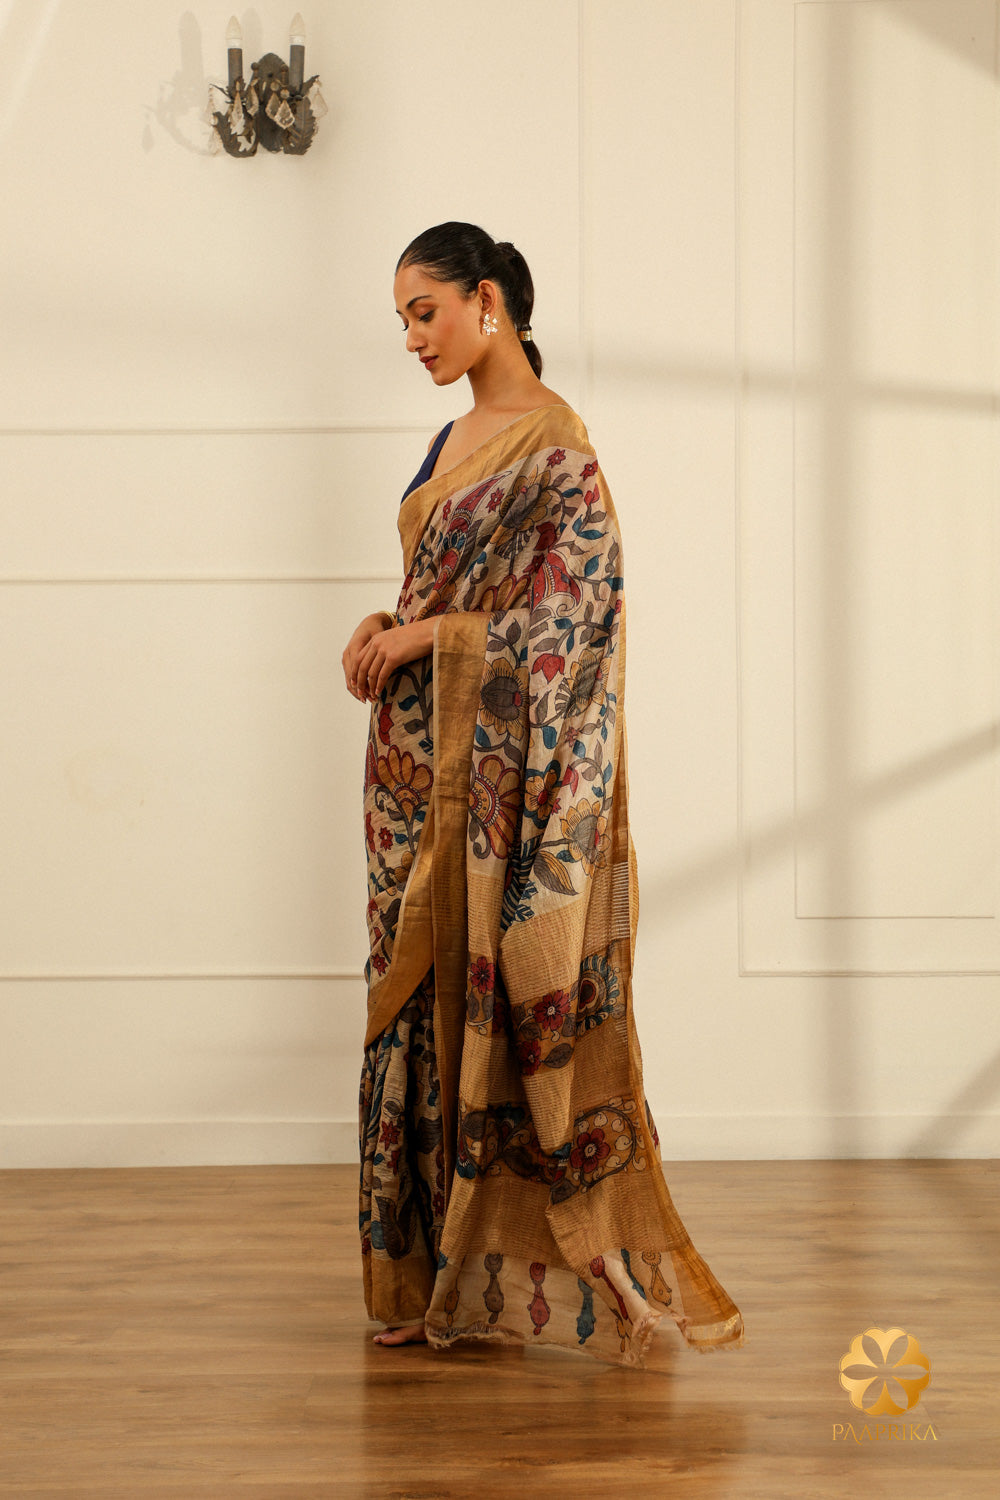 A close-up of the saree's pallu, highlighting the intricate floral creepers and leaves motifs and their naturalistic detailing against the cream background.